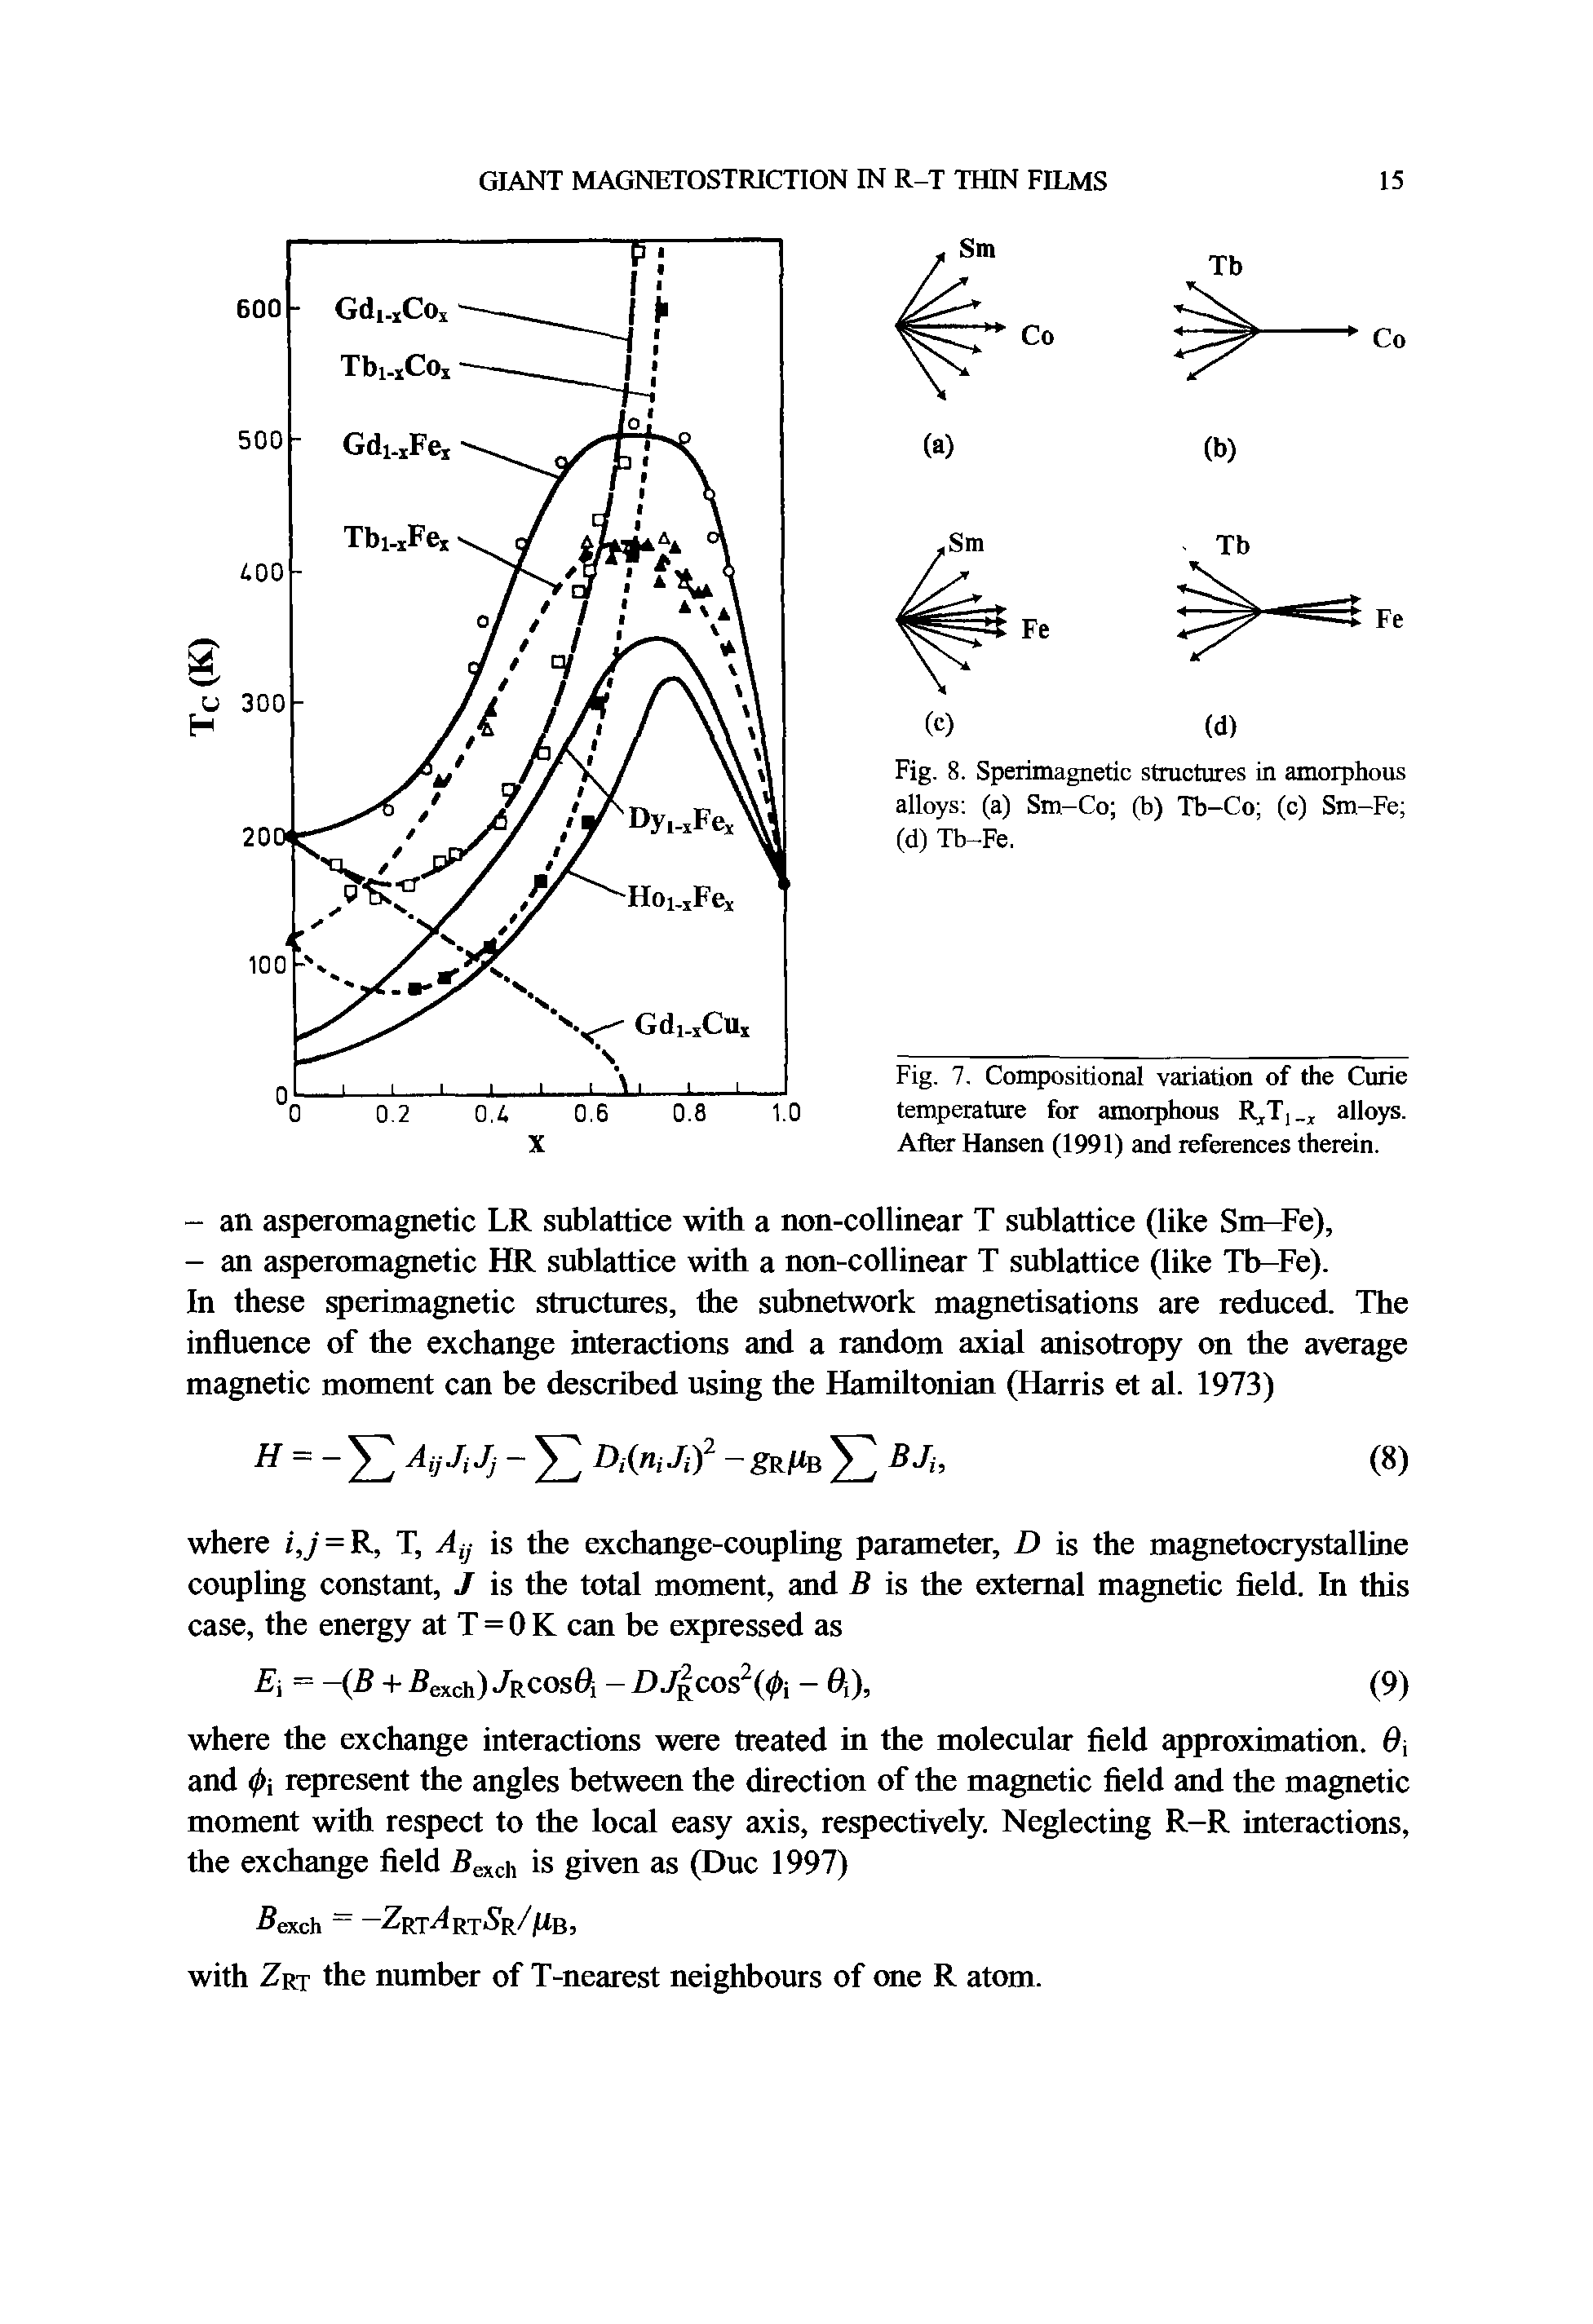 Fig. 7. Compositional variation of the Curie temperature for amorphous R,T,, alloys. After Hansen (1991) and references therein.